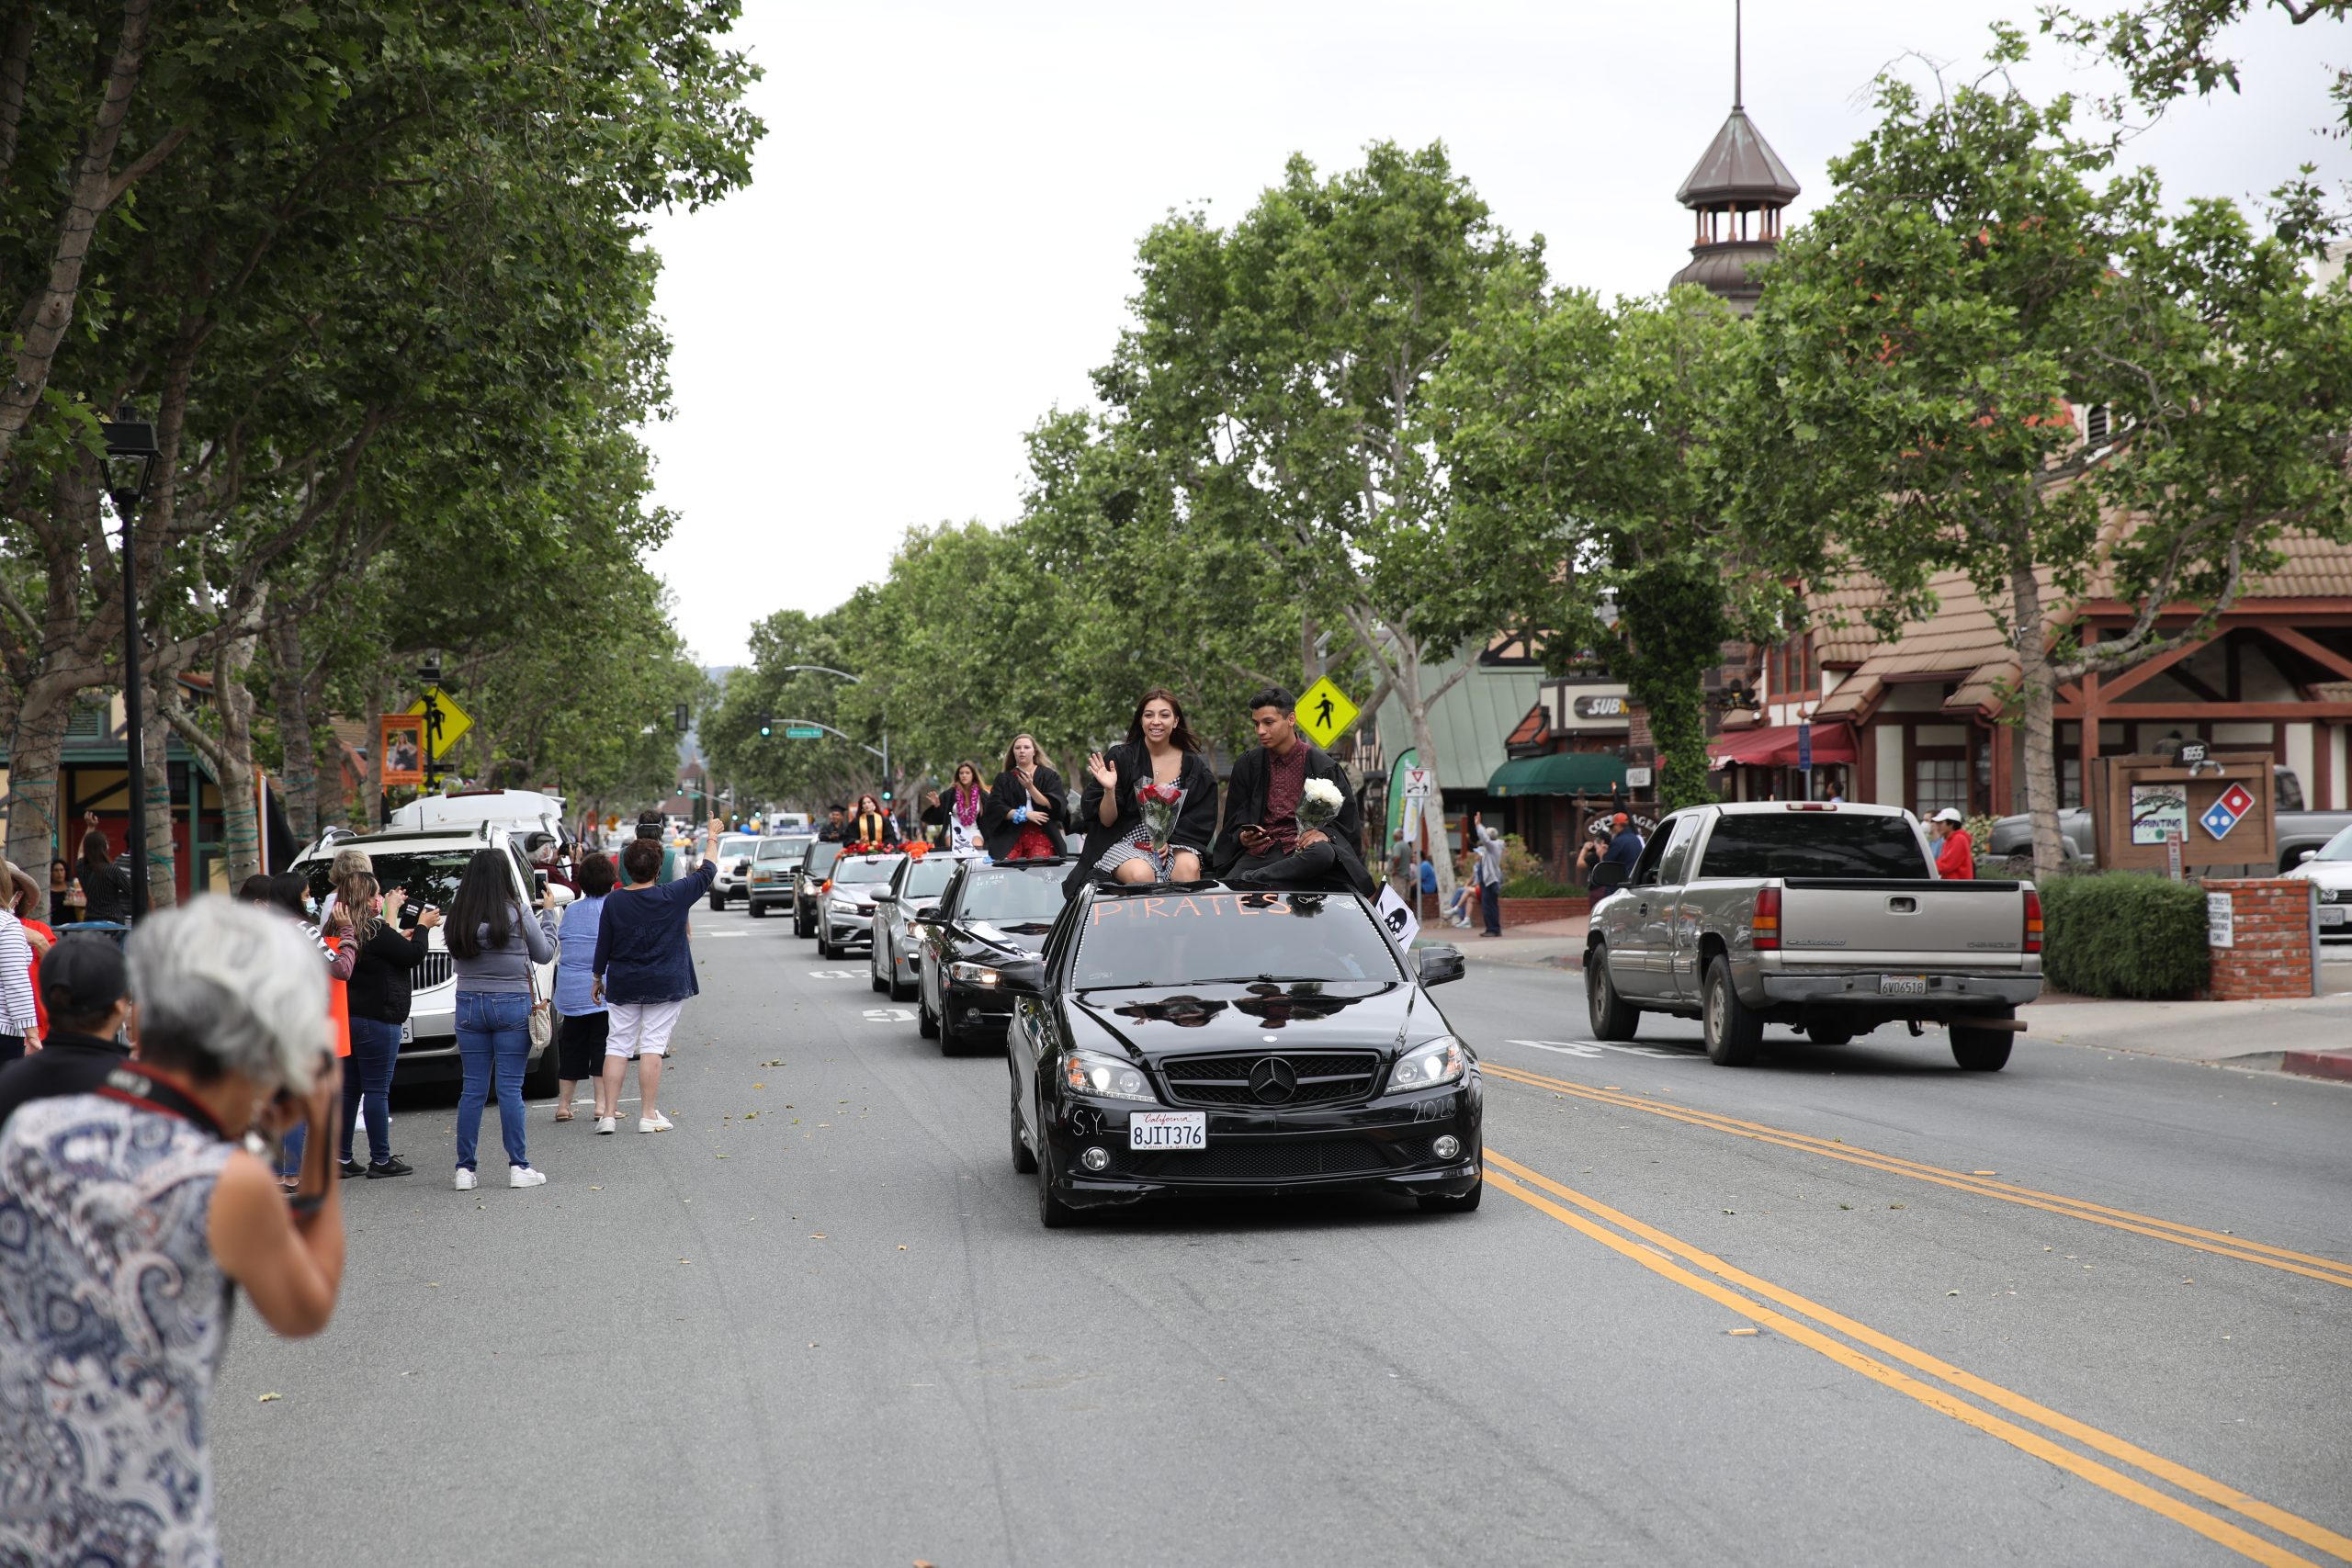 Class of 2020 ends the school year with parade through SYV